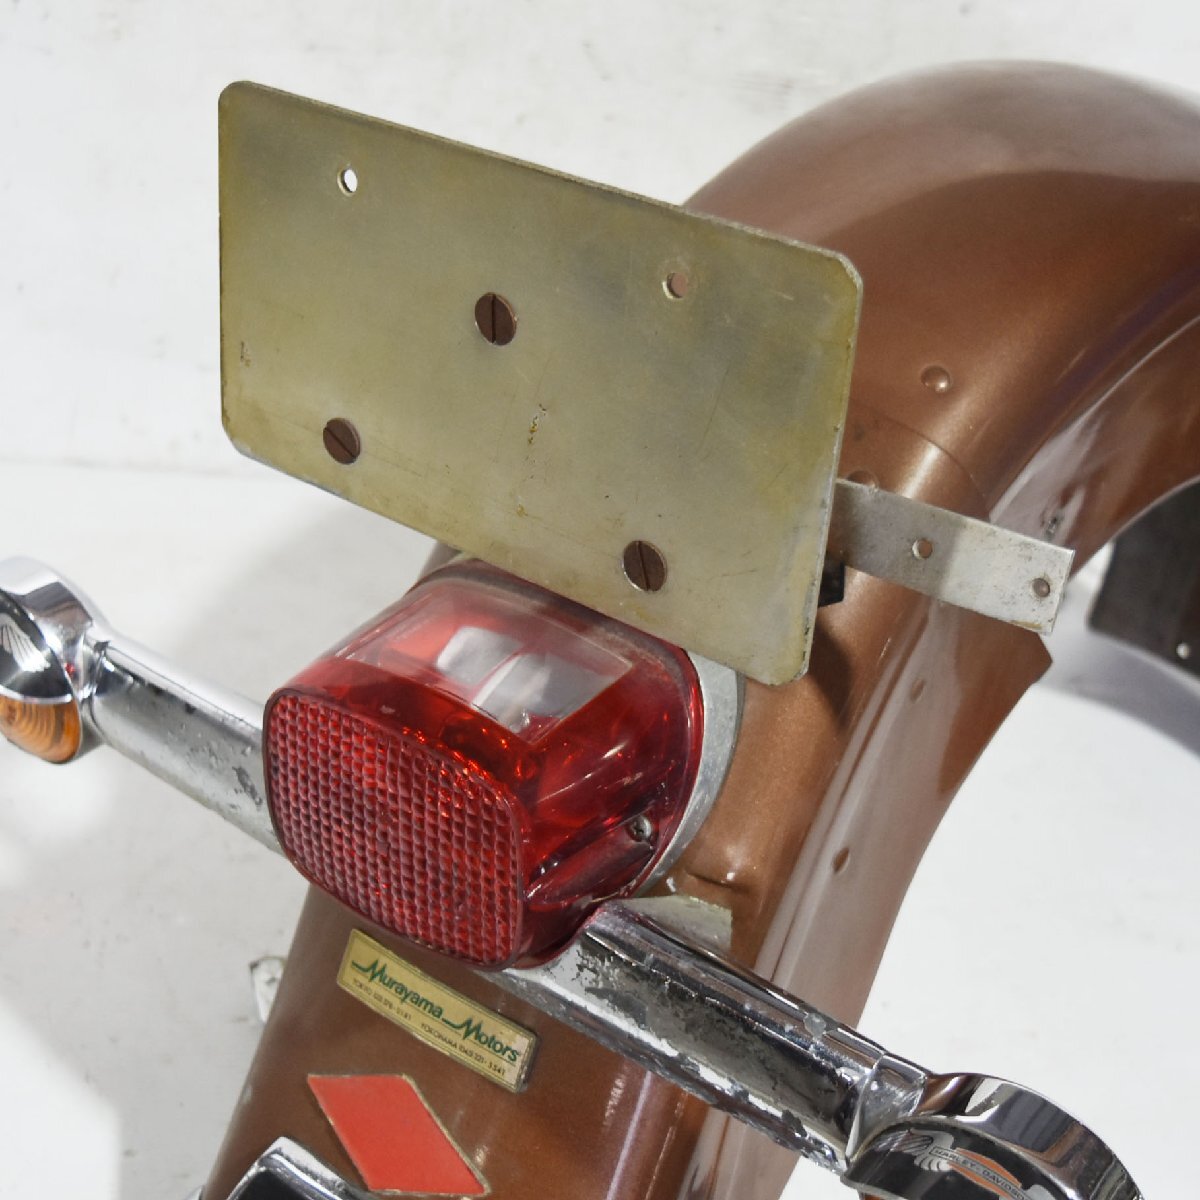  Harley 1977 year shovel FLH1200 rear fender tail lamp turn signal number stay [G] HD-137